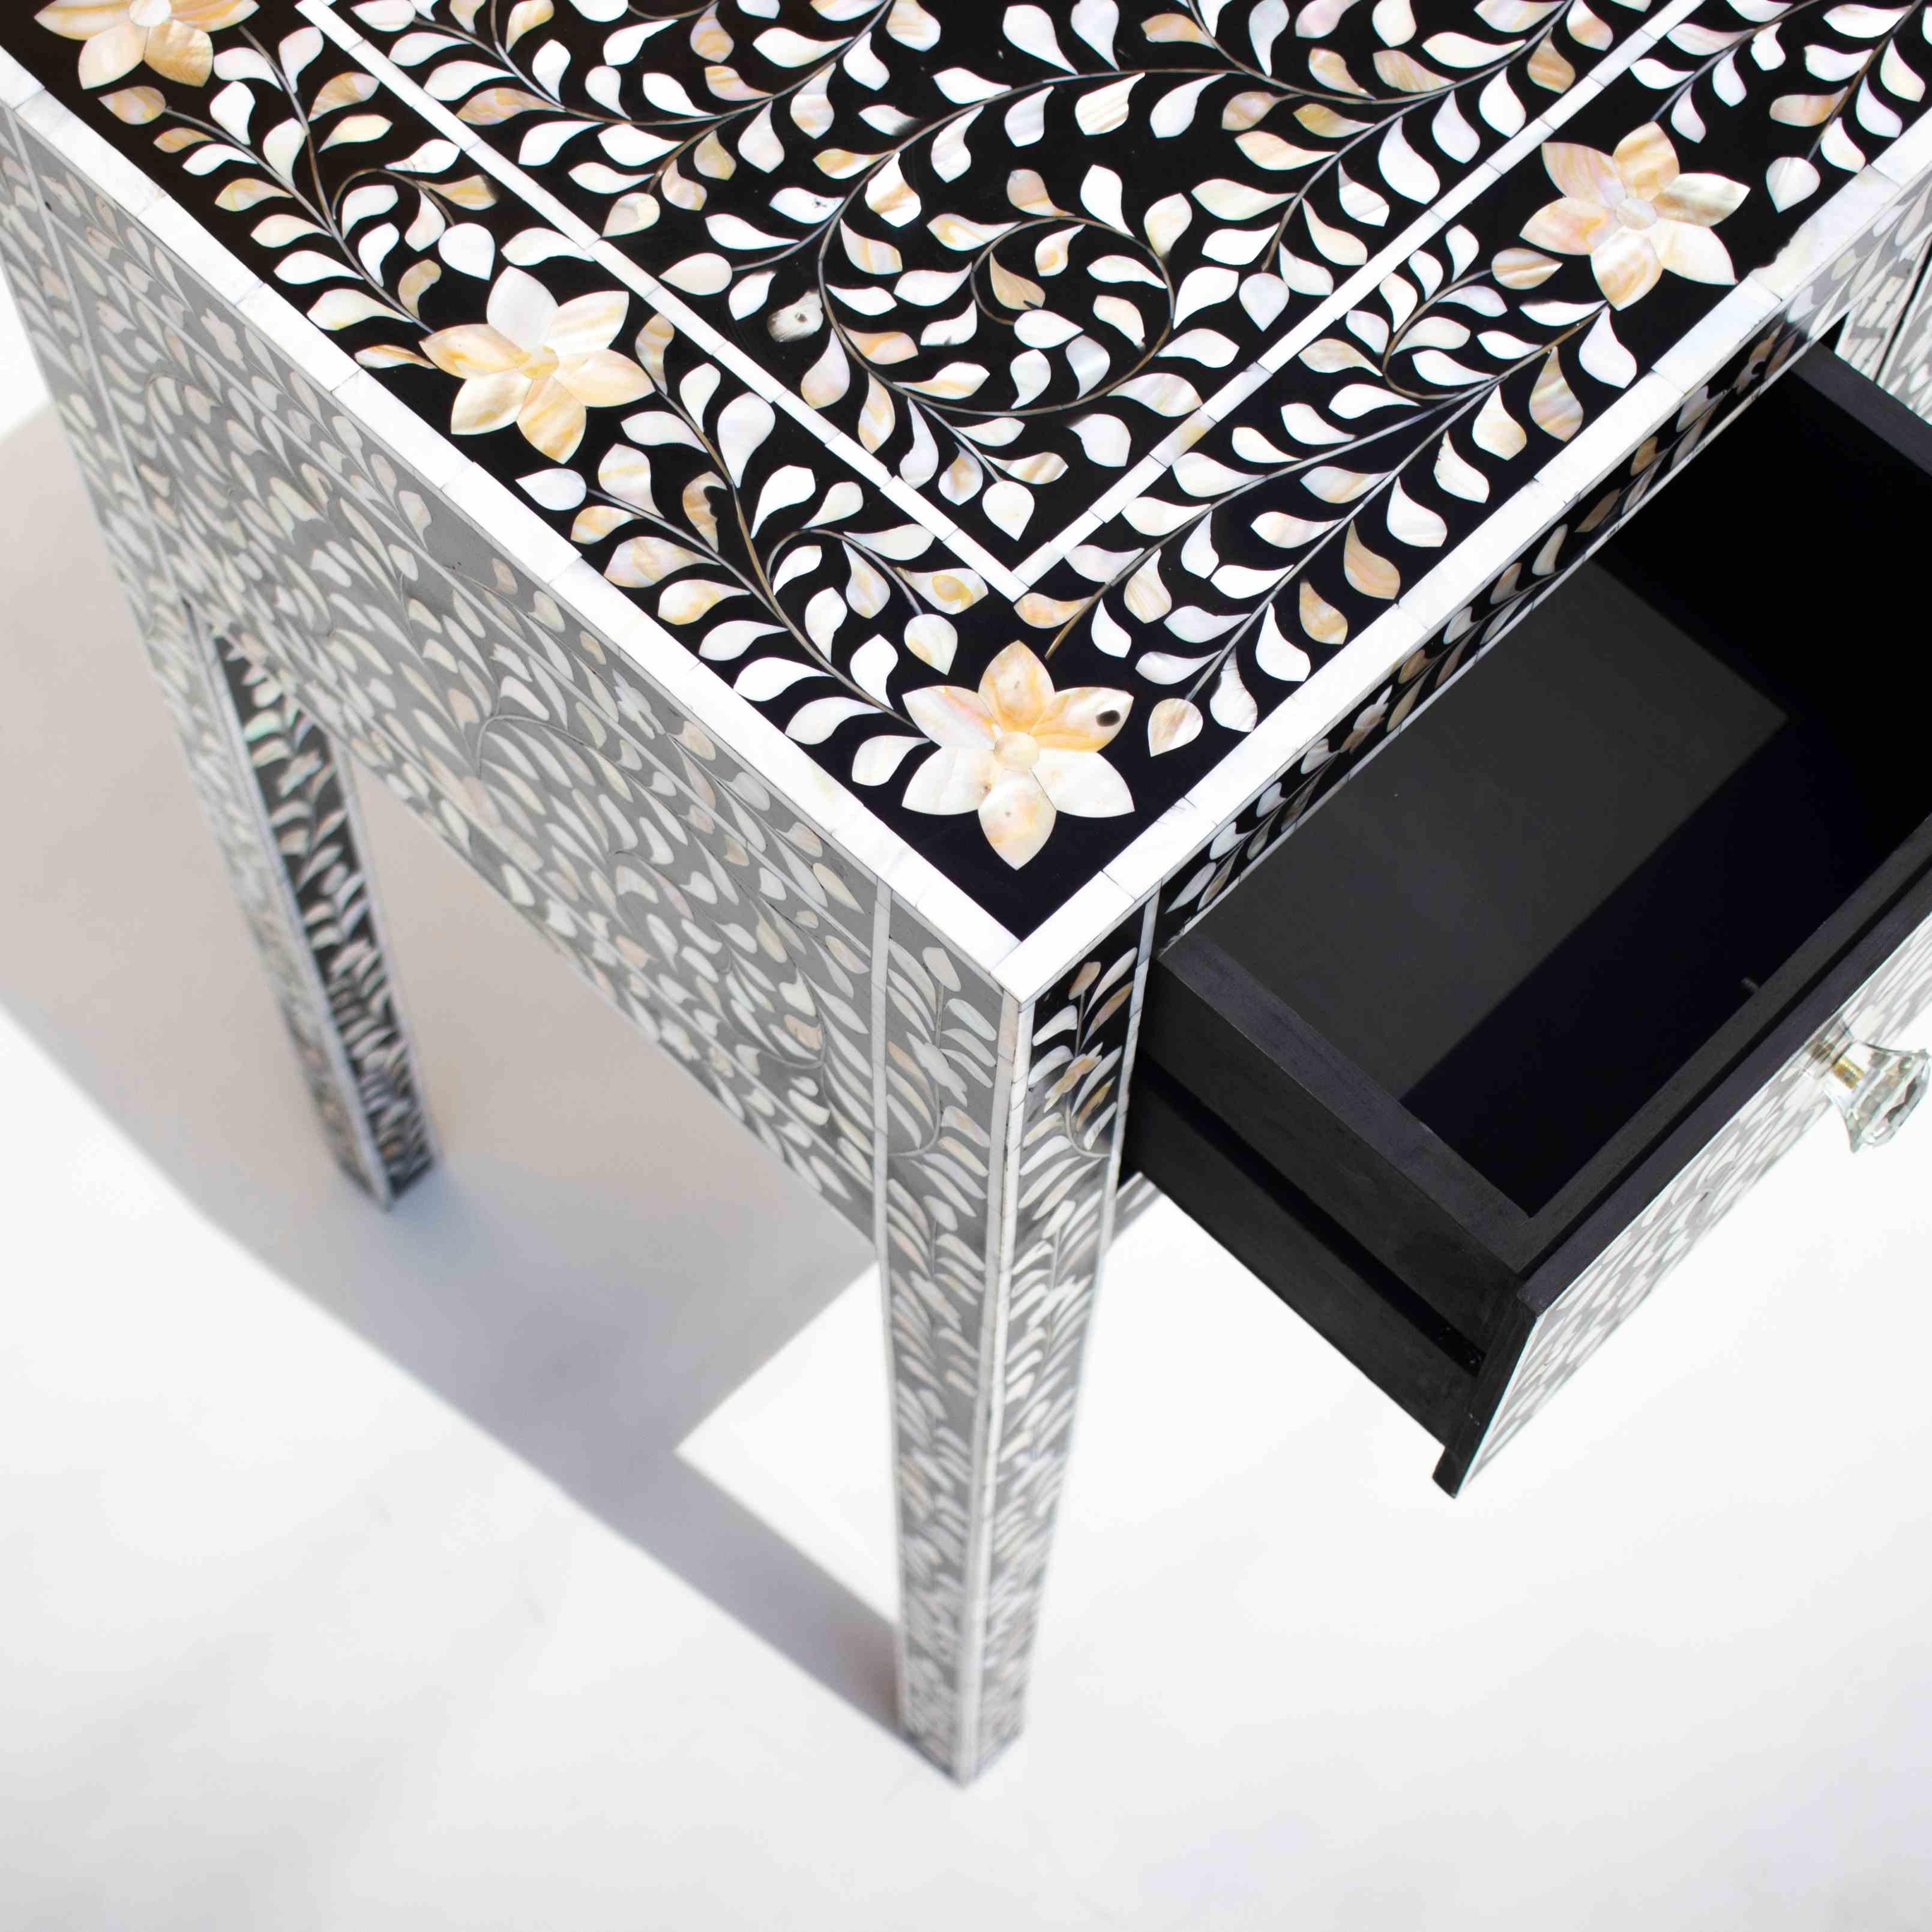 Introducing our exquisite black mother of pearl inlay desk, a statement piece that seamlessly merges timeless elegance with modern functionality. Adorned with intricate flower patterns, this desk pays homage to the ancient art form of decorated